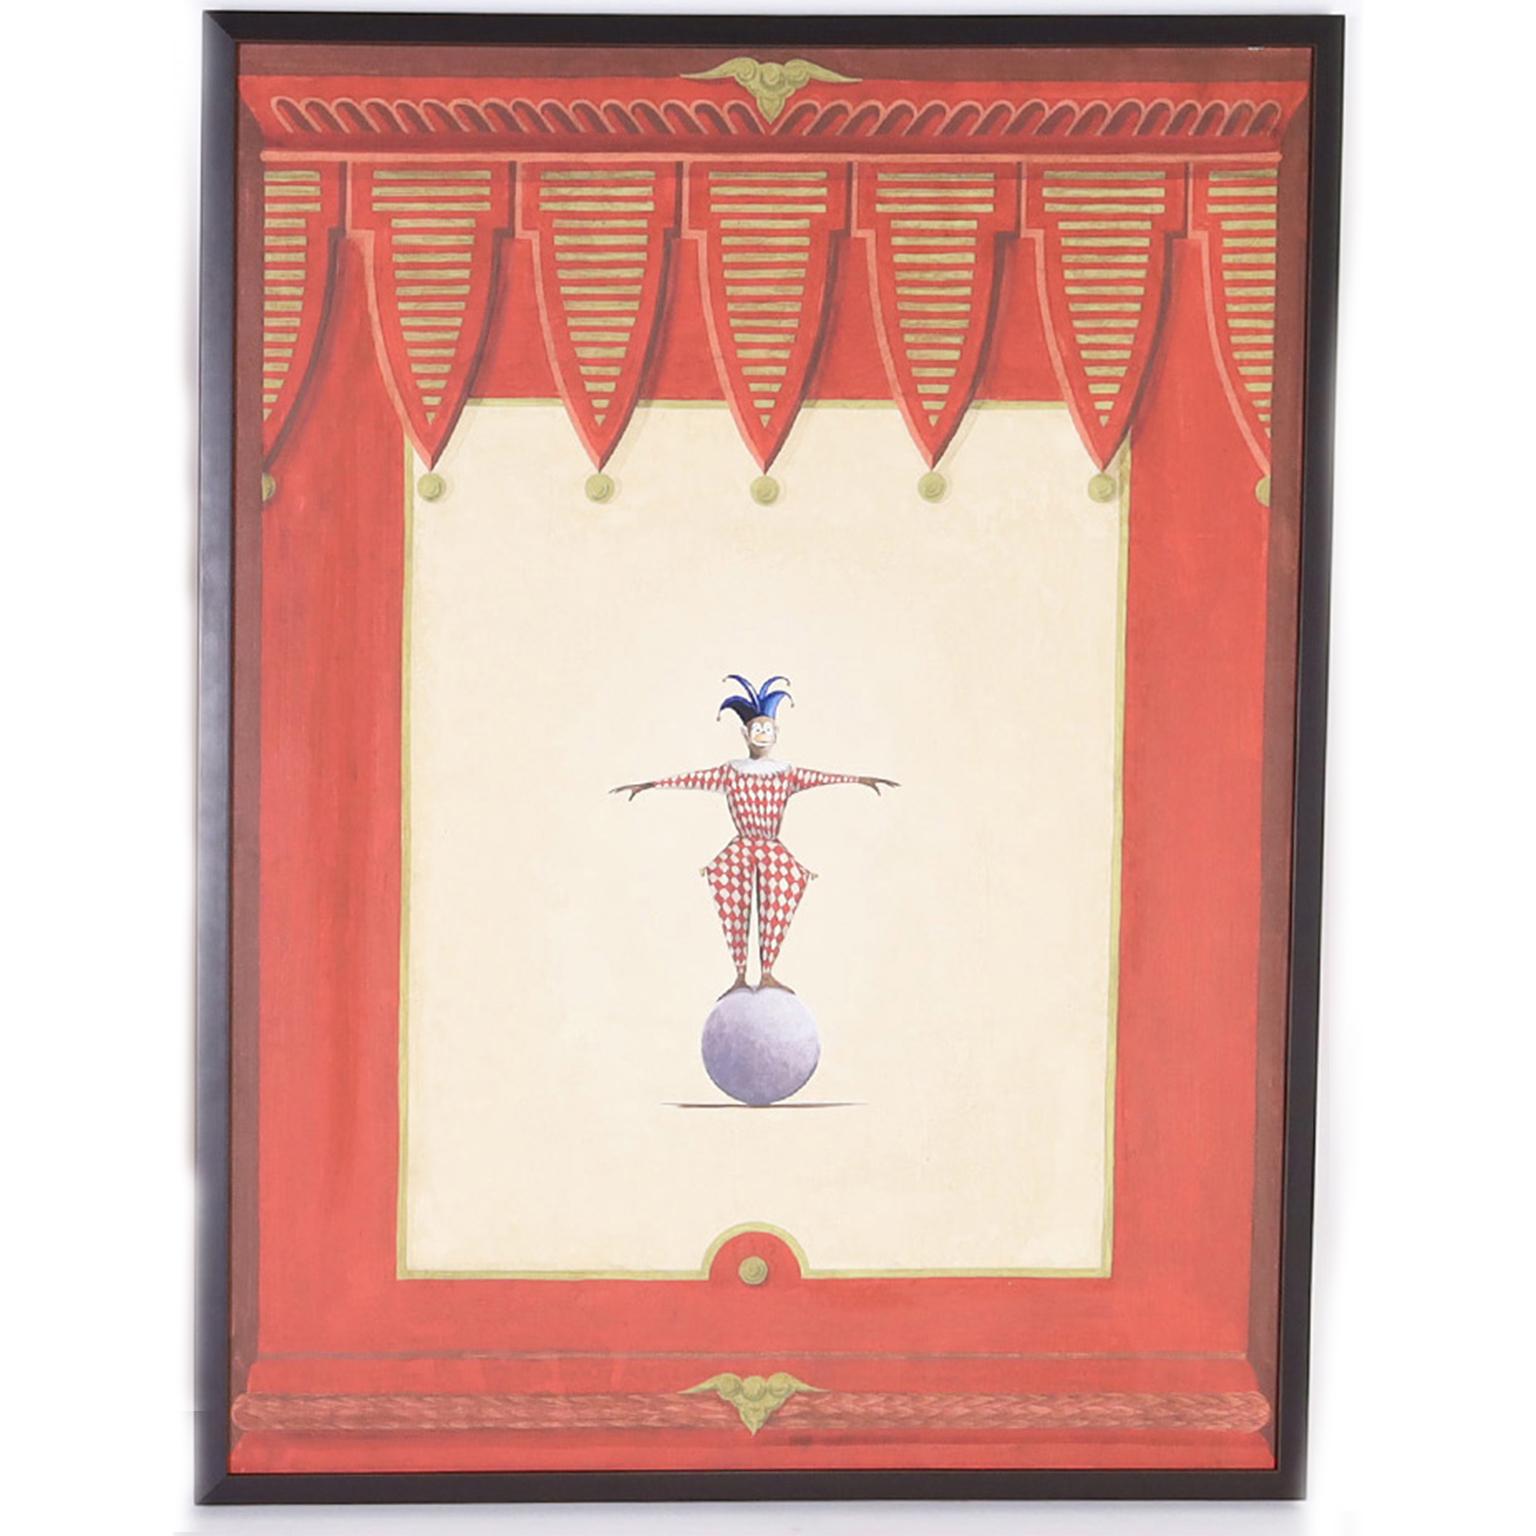 Italian painting on canvas executed with a theatrical combination of trompe l’oeil and whimsey. Depicting a monkey in a court jester outfit balancing on a ball, signed Vitorio Splendore on the back.